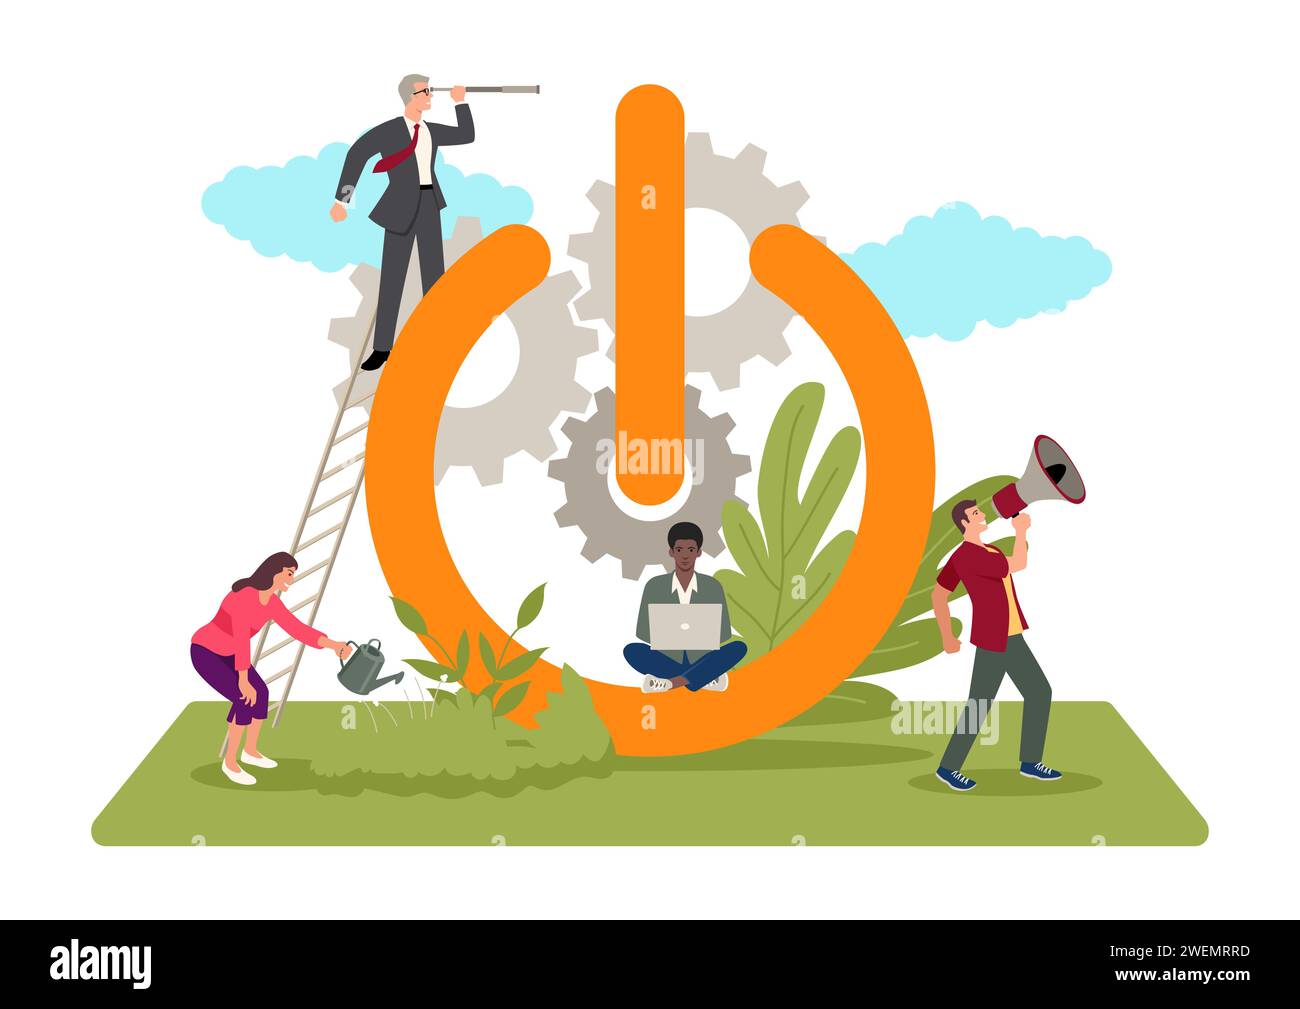 Simple flat vector illustration of casual business people carry out activities to improve performance at the giant on button symbol, start-up business Stock Vector